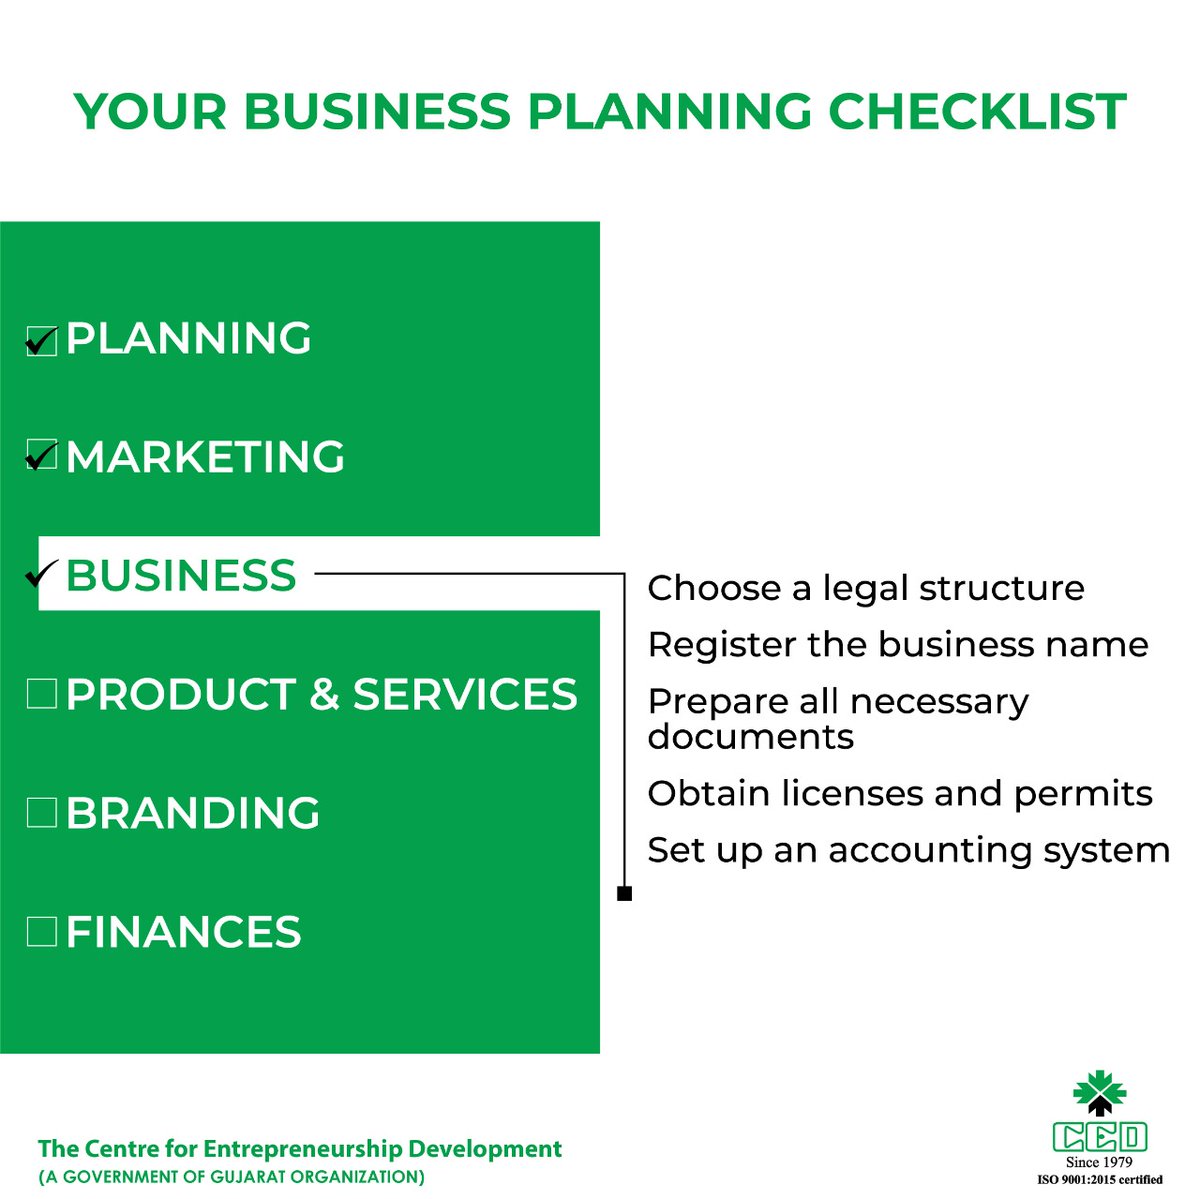 Thinking of starting your own business?
Here is a checklist to sort you out while setting up your business.

#entrepreneur #businesschecklist #skillindia #startupindia